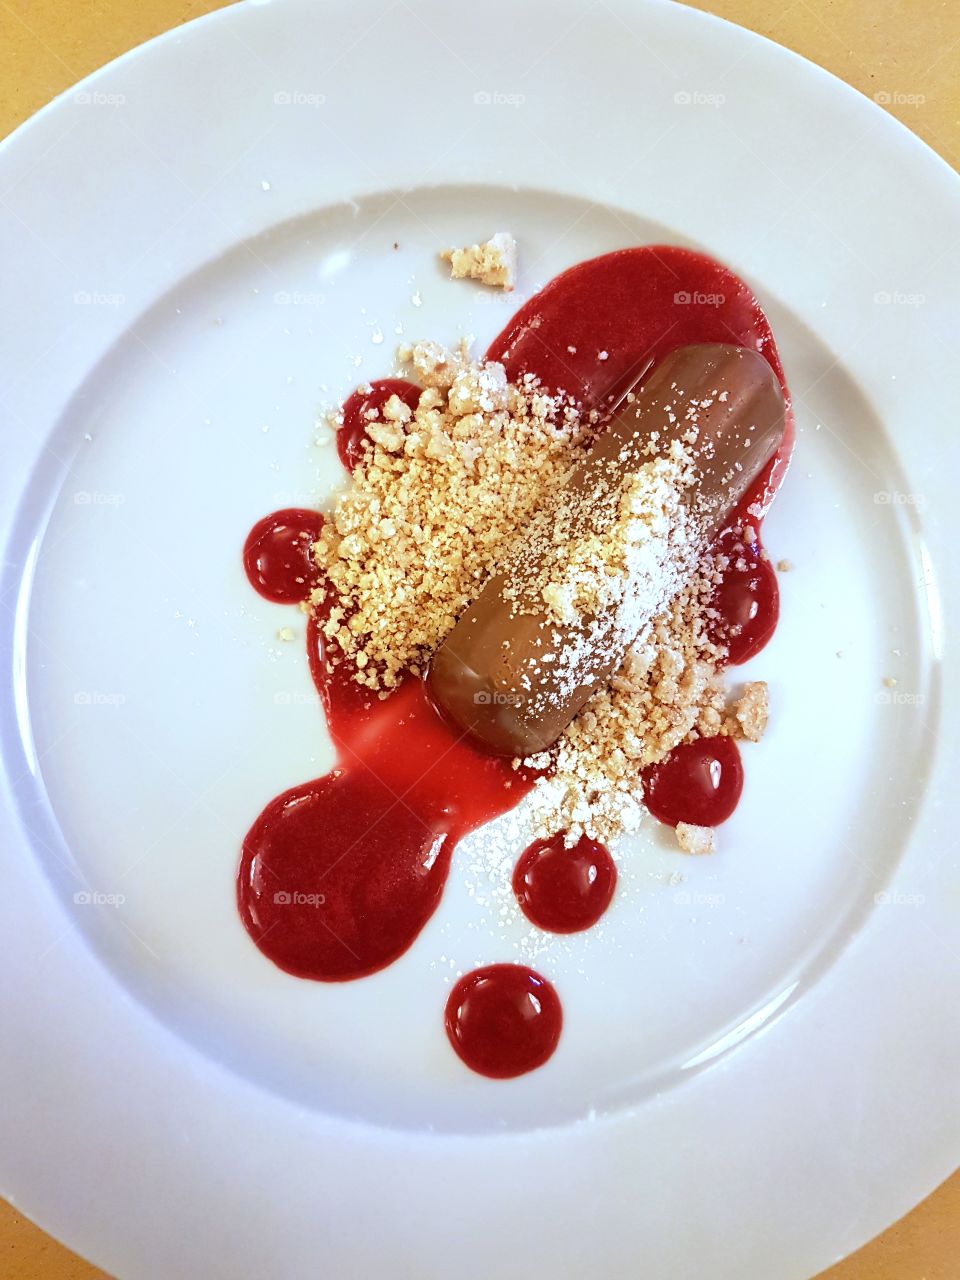 Chocolate dessert with strawberry sauce and nougat grain